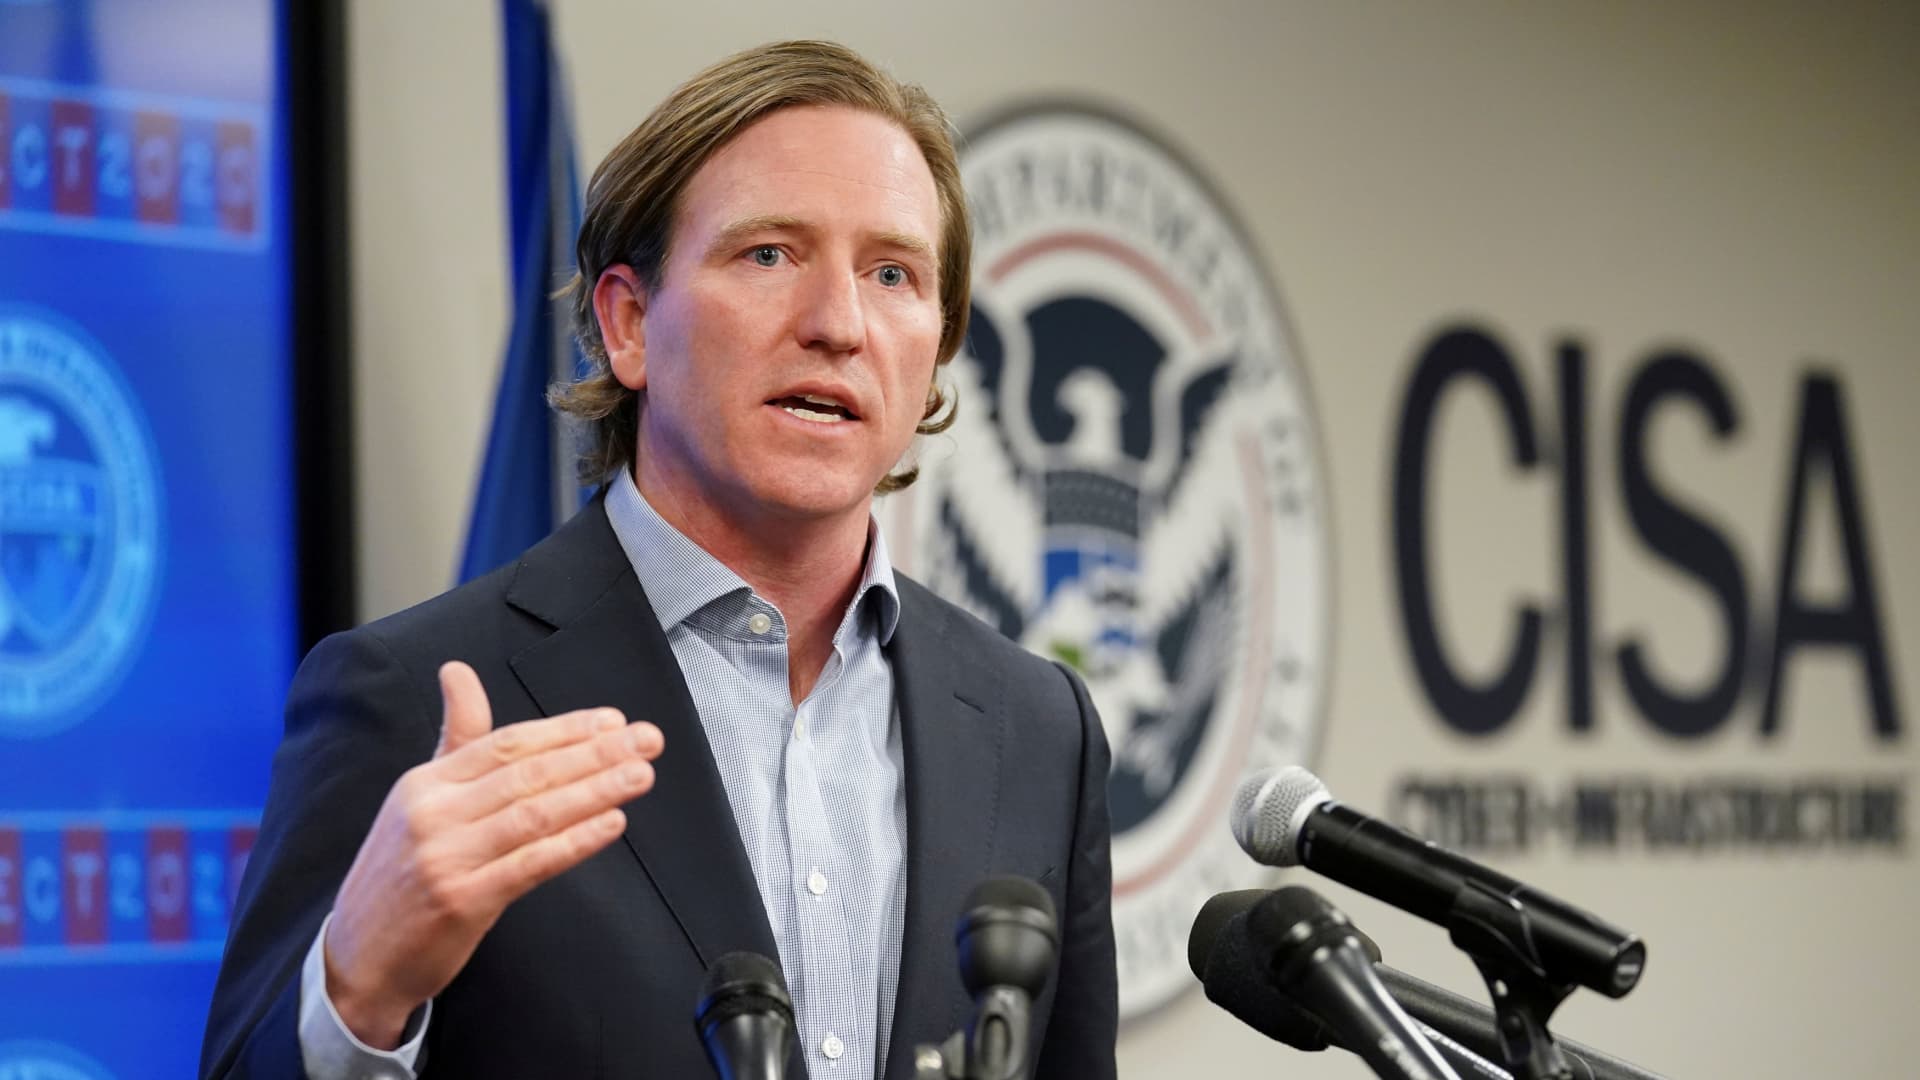 U.S. Cybersecurity and Infrastructure Security Agency (CISA) Director Christopher Krebs speaks to reporters at CISA’s Election Day Operation Center on Super Tuesday in Arlington, Virginia, U.S., March 3, 2020.